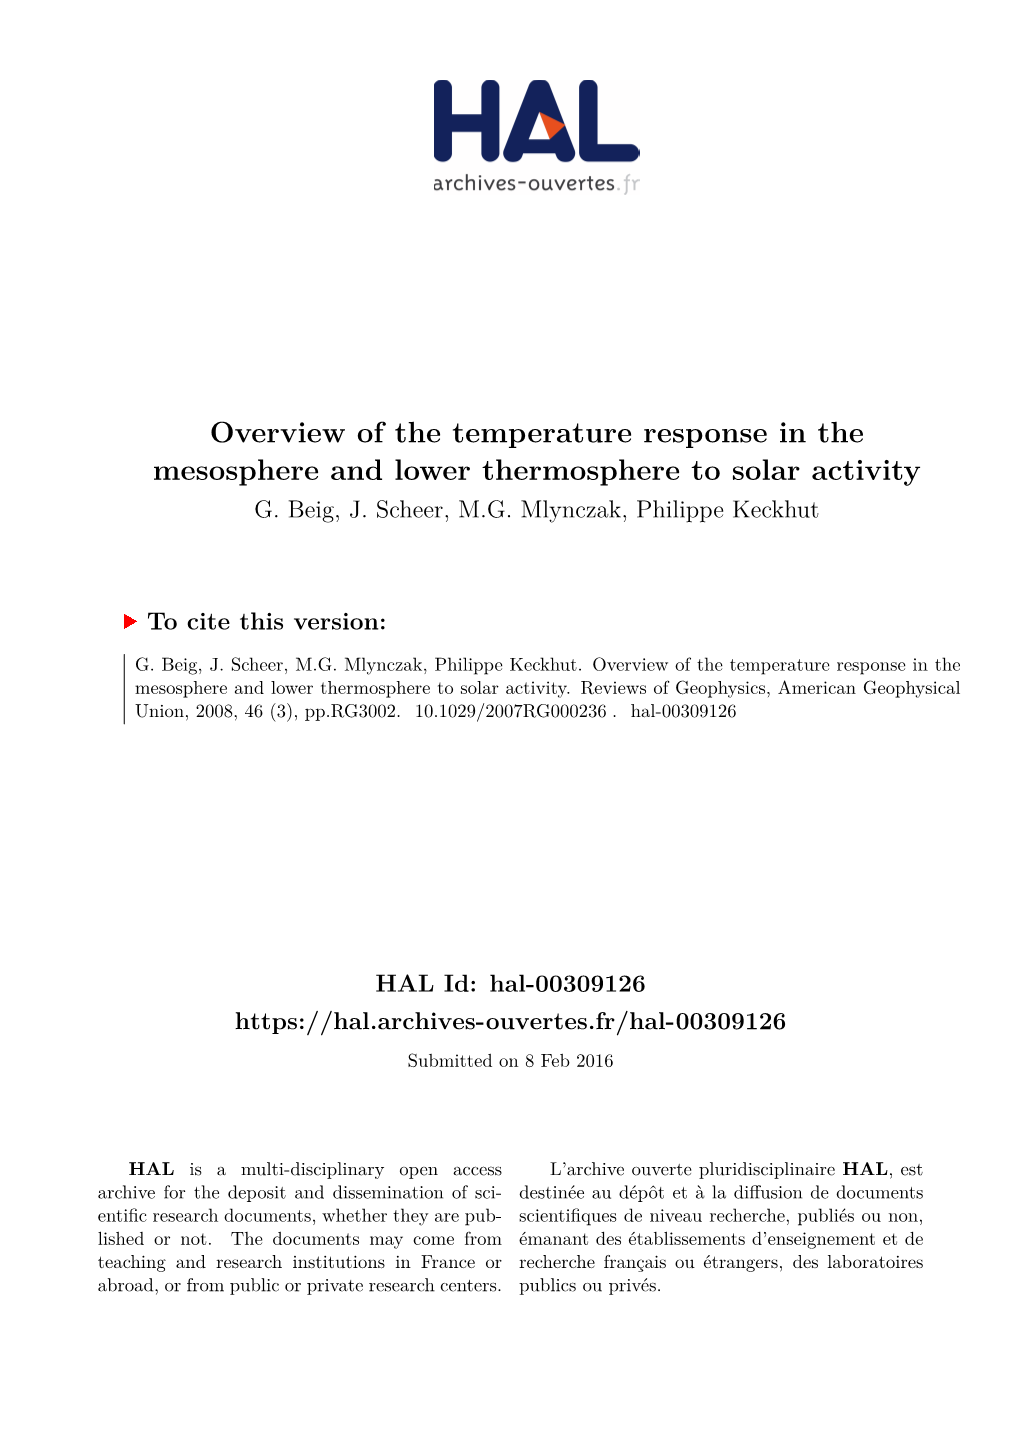 Overview of the Temperature Response in the Mesosphere and Lower Thermosphere to Solar Activity G